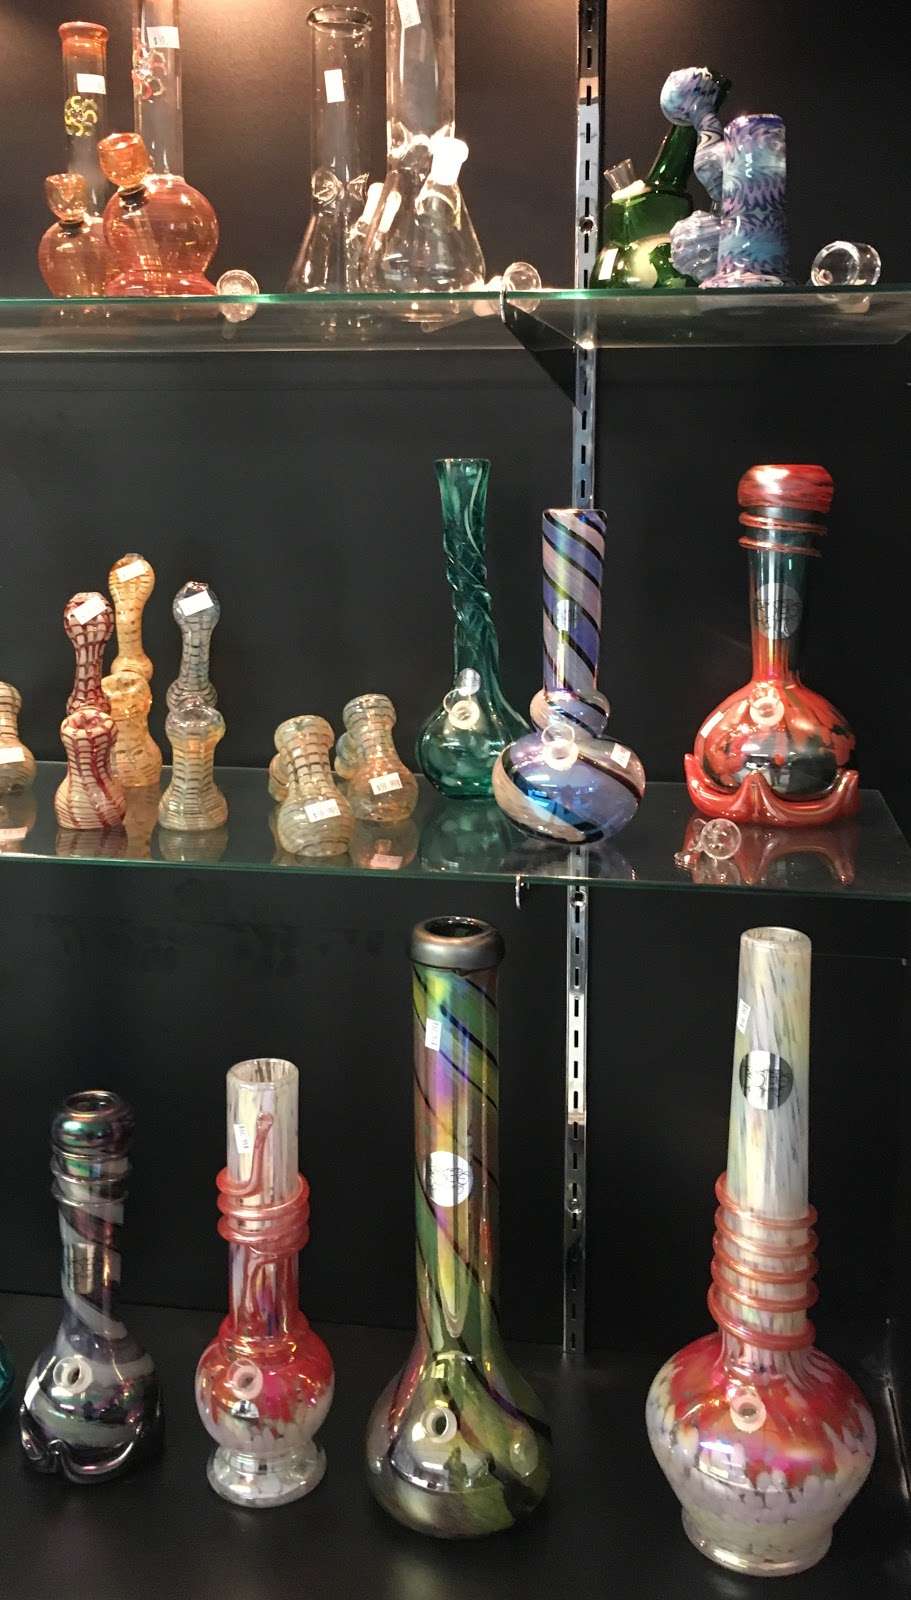 Endless Mountain Glass Gallery | 45 S Main St, Carbondale, PA 18407 | Phone: (570) 397-6035